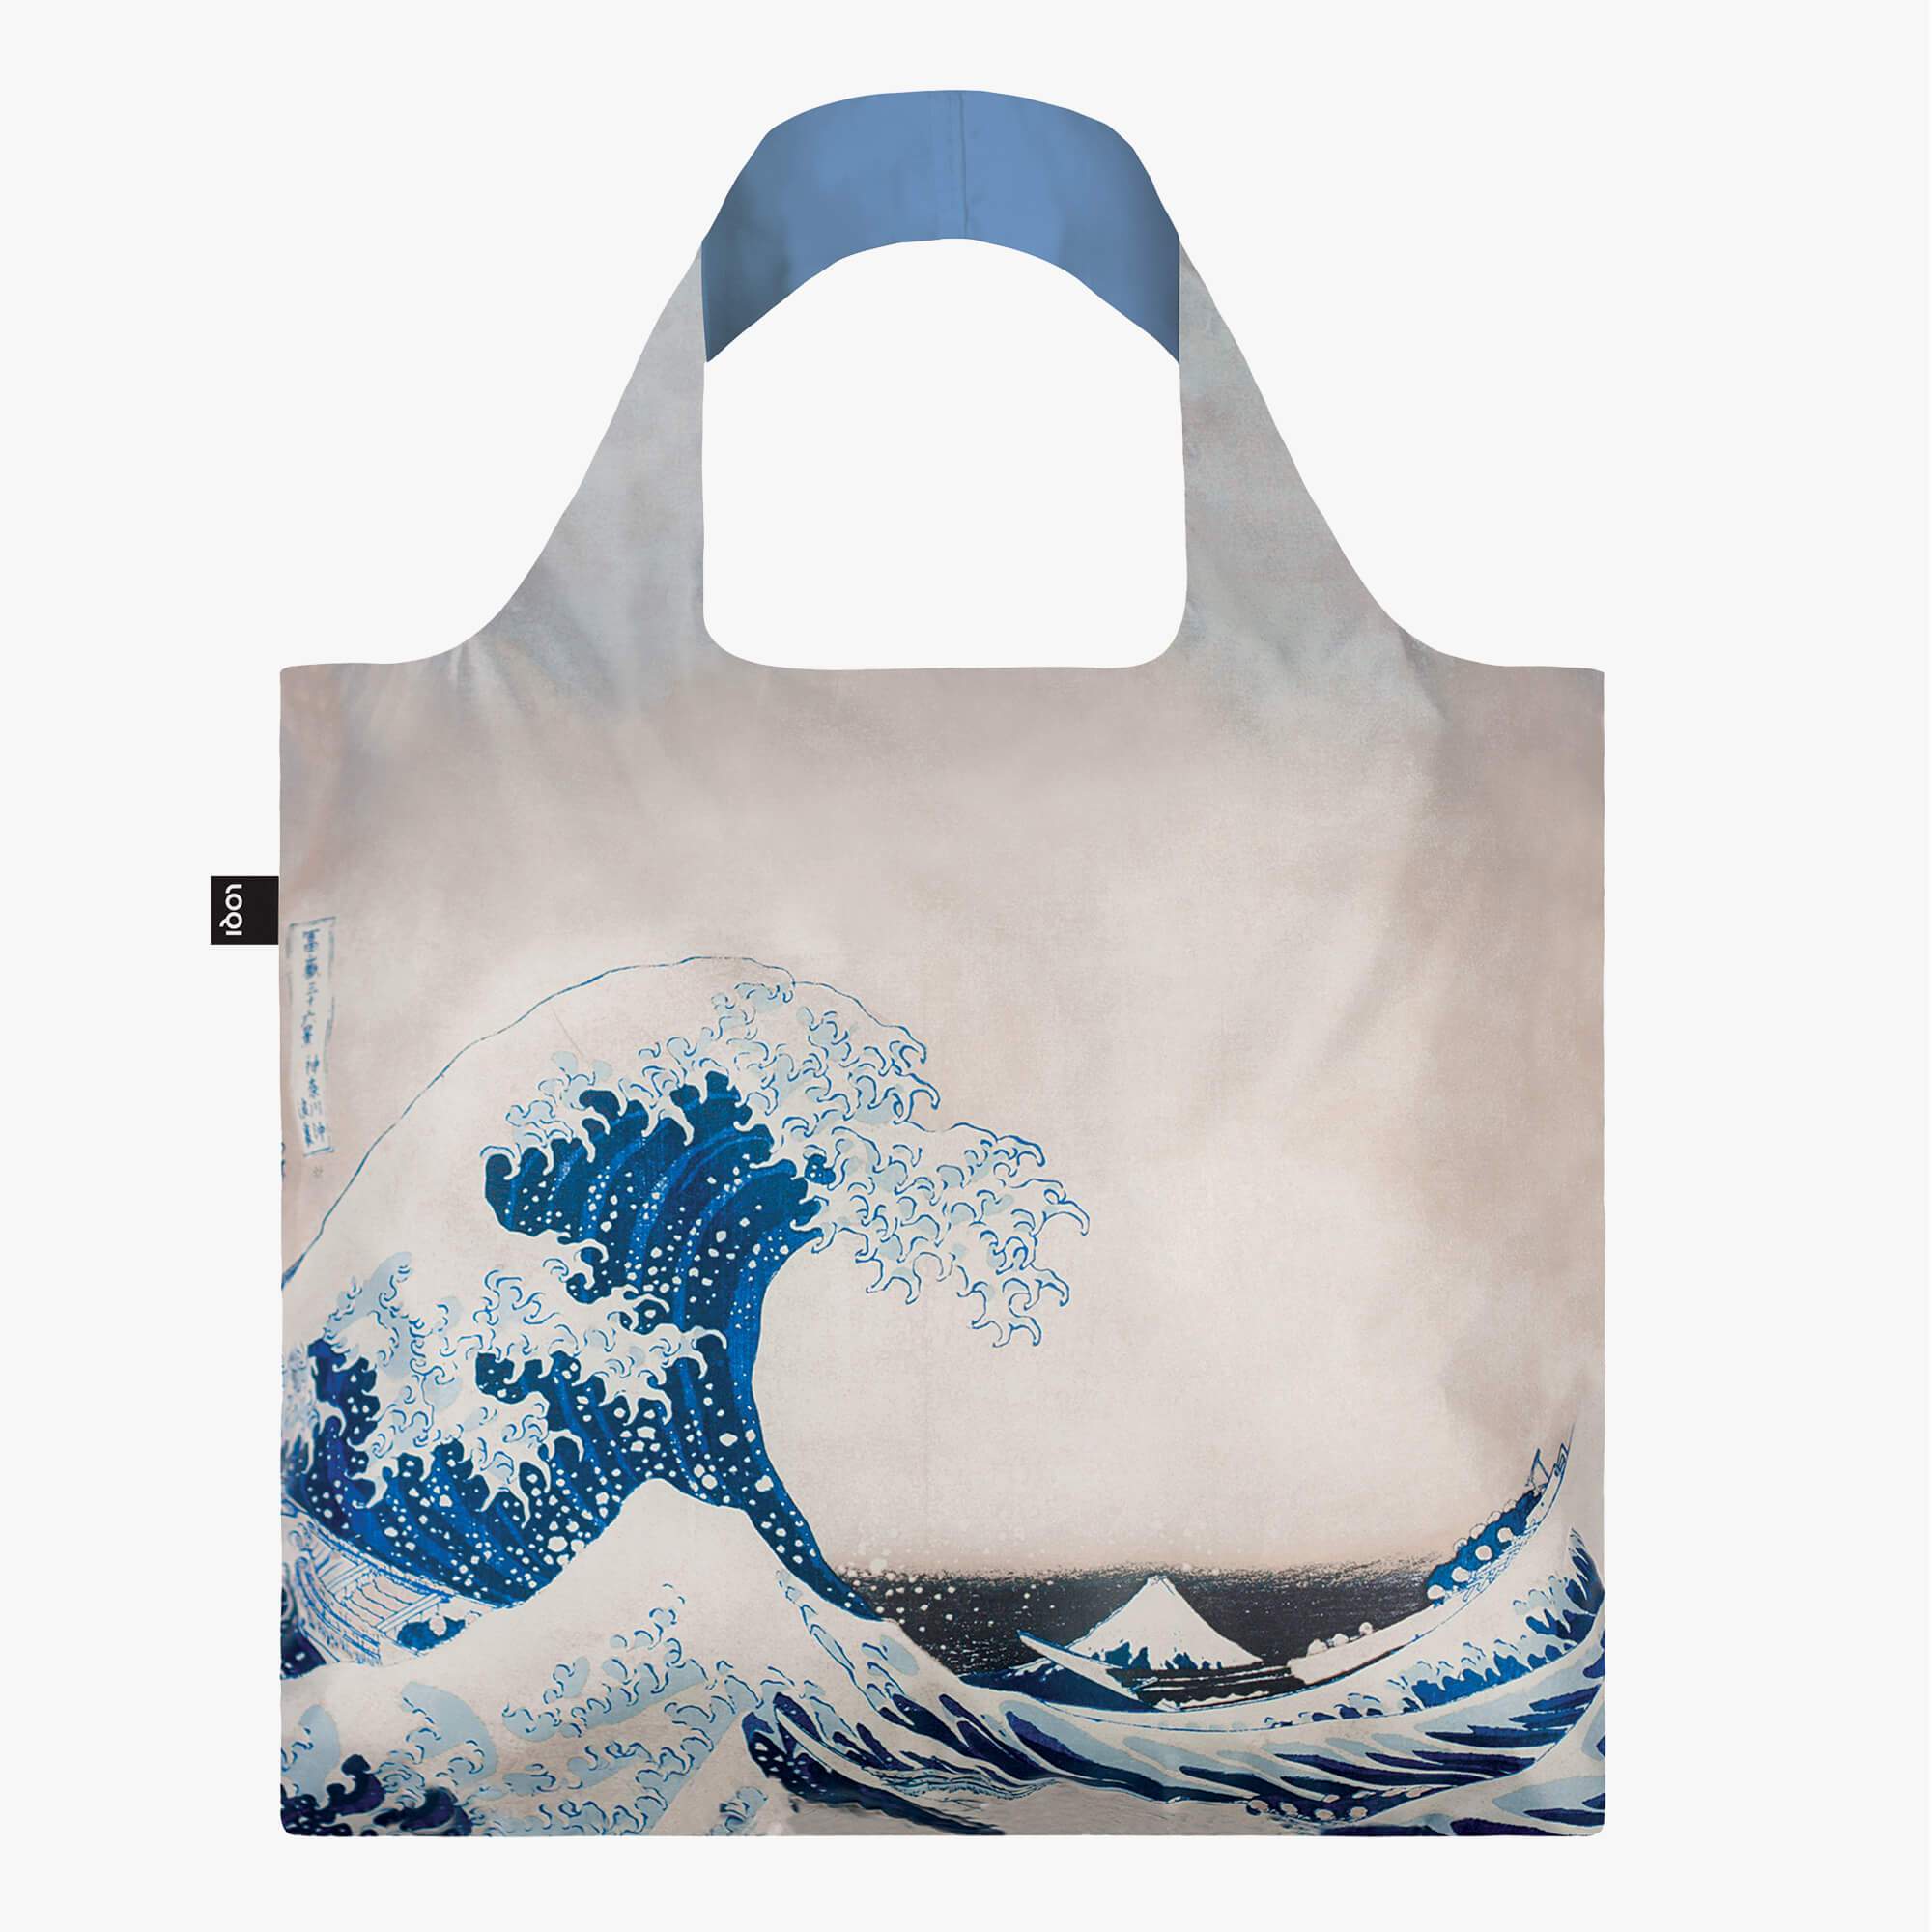 The Great Wave Recycled Bag